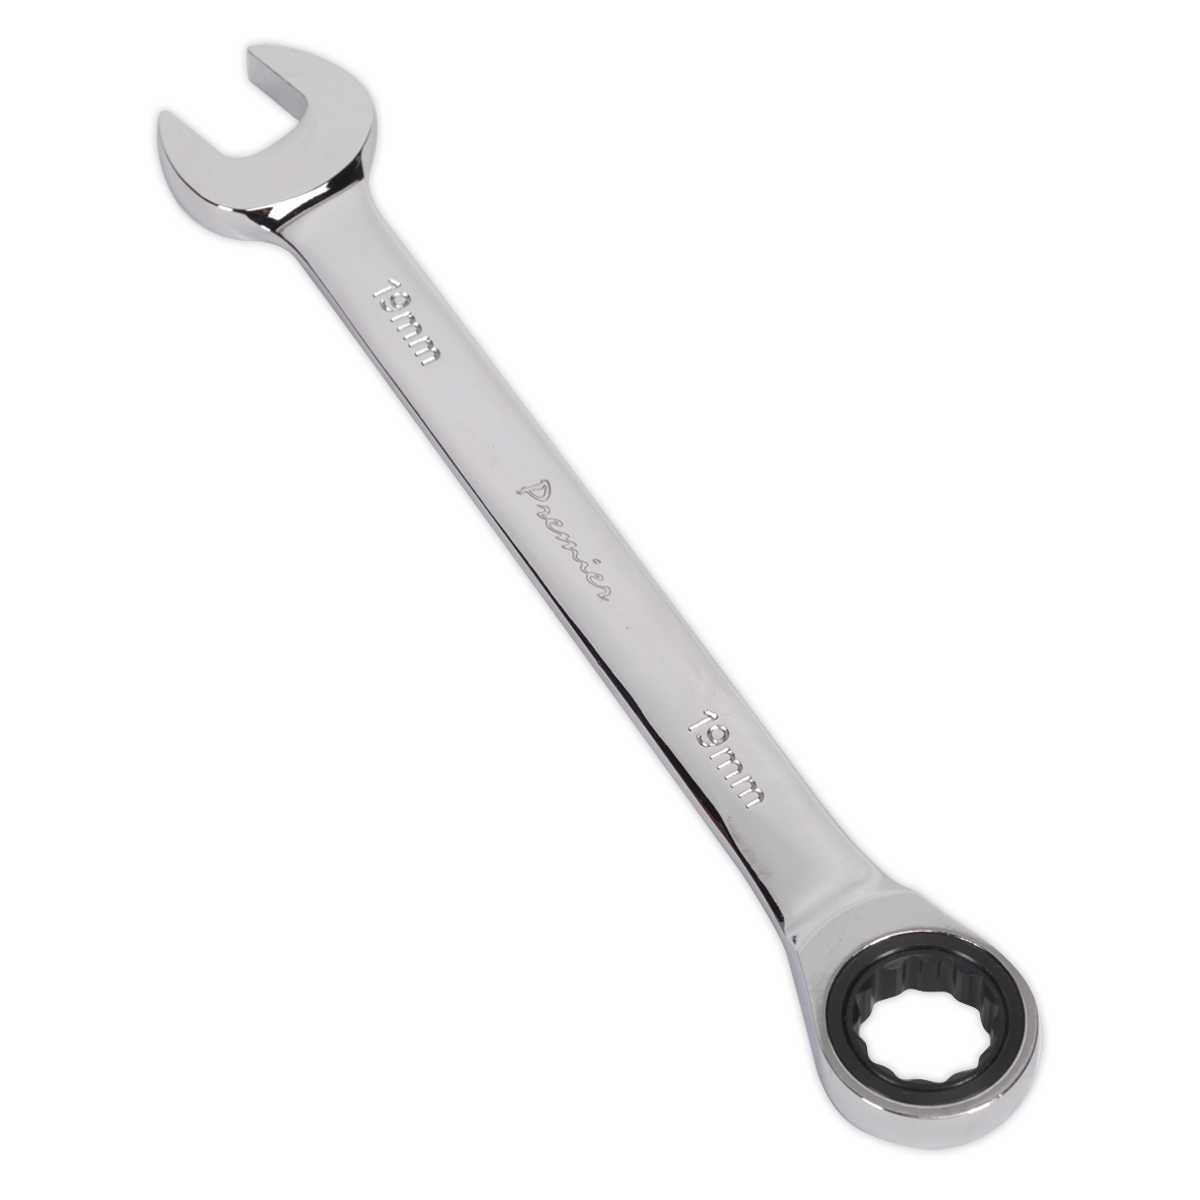 SEALEY - RCW19 Ratchet Combination Spanner 19mm